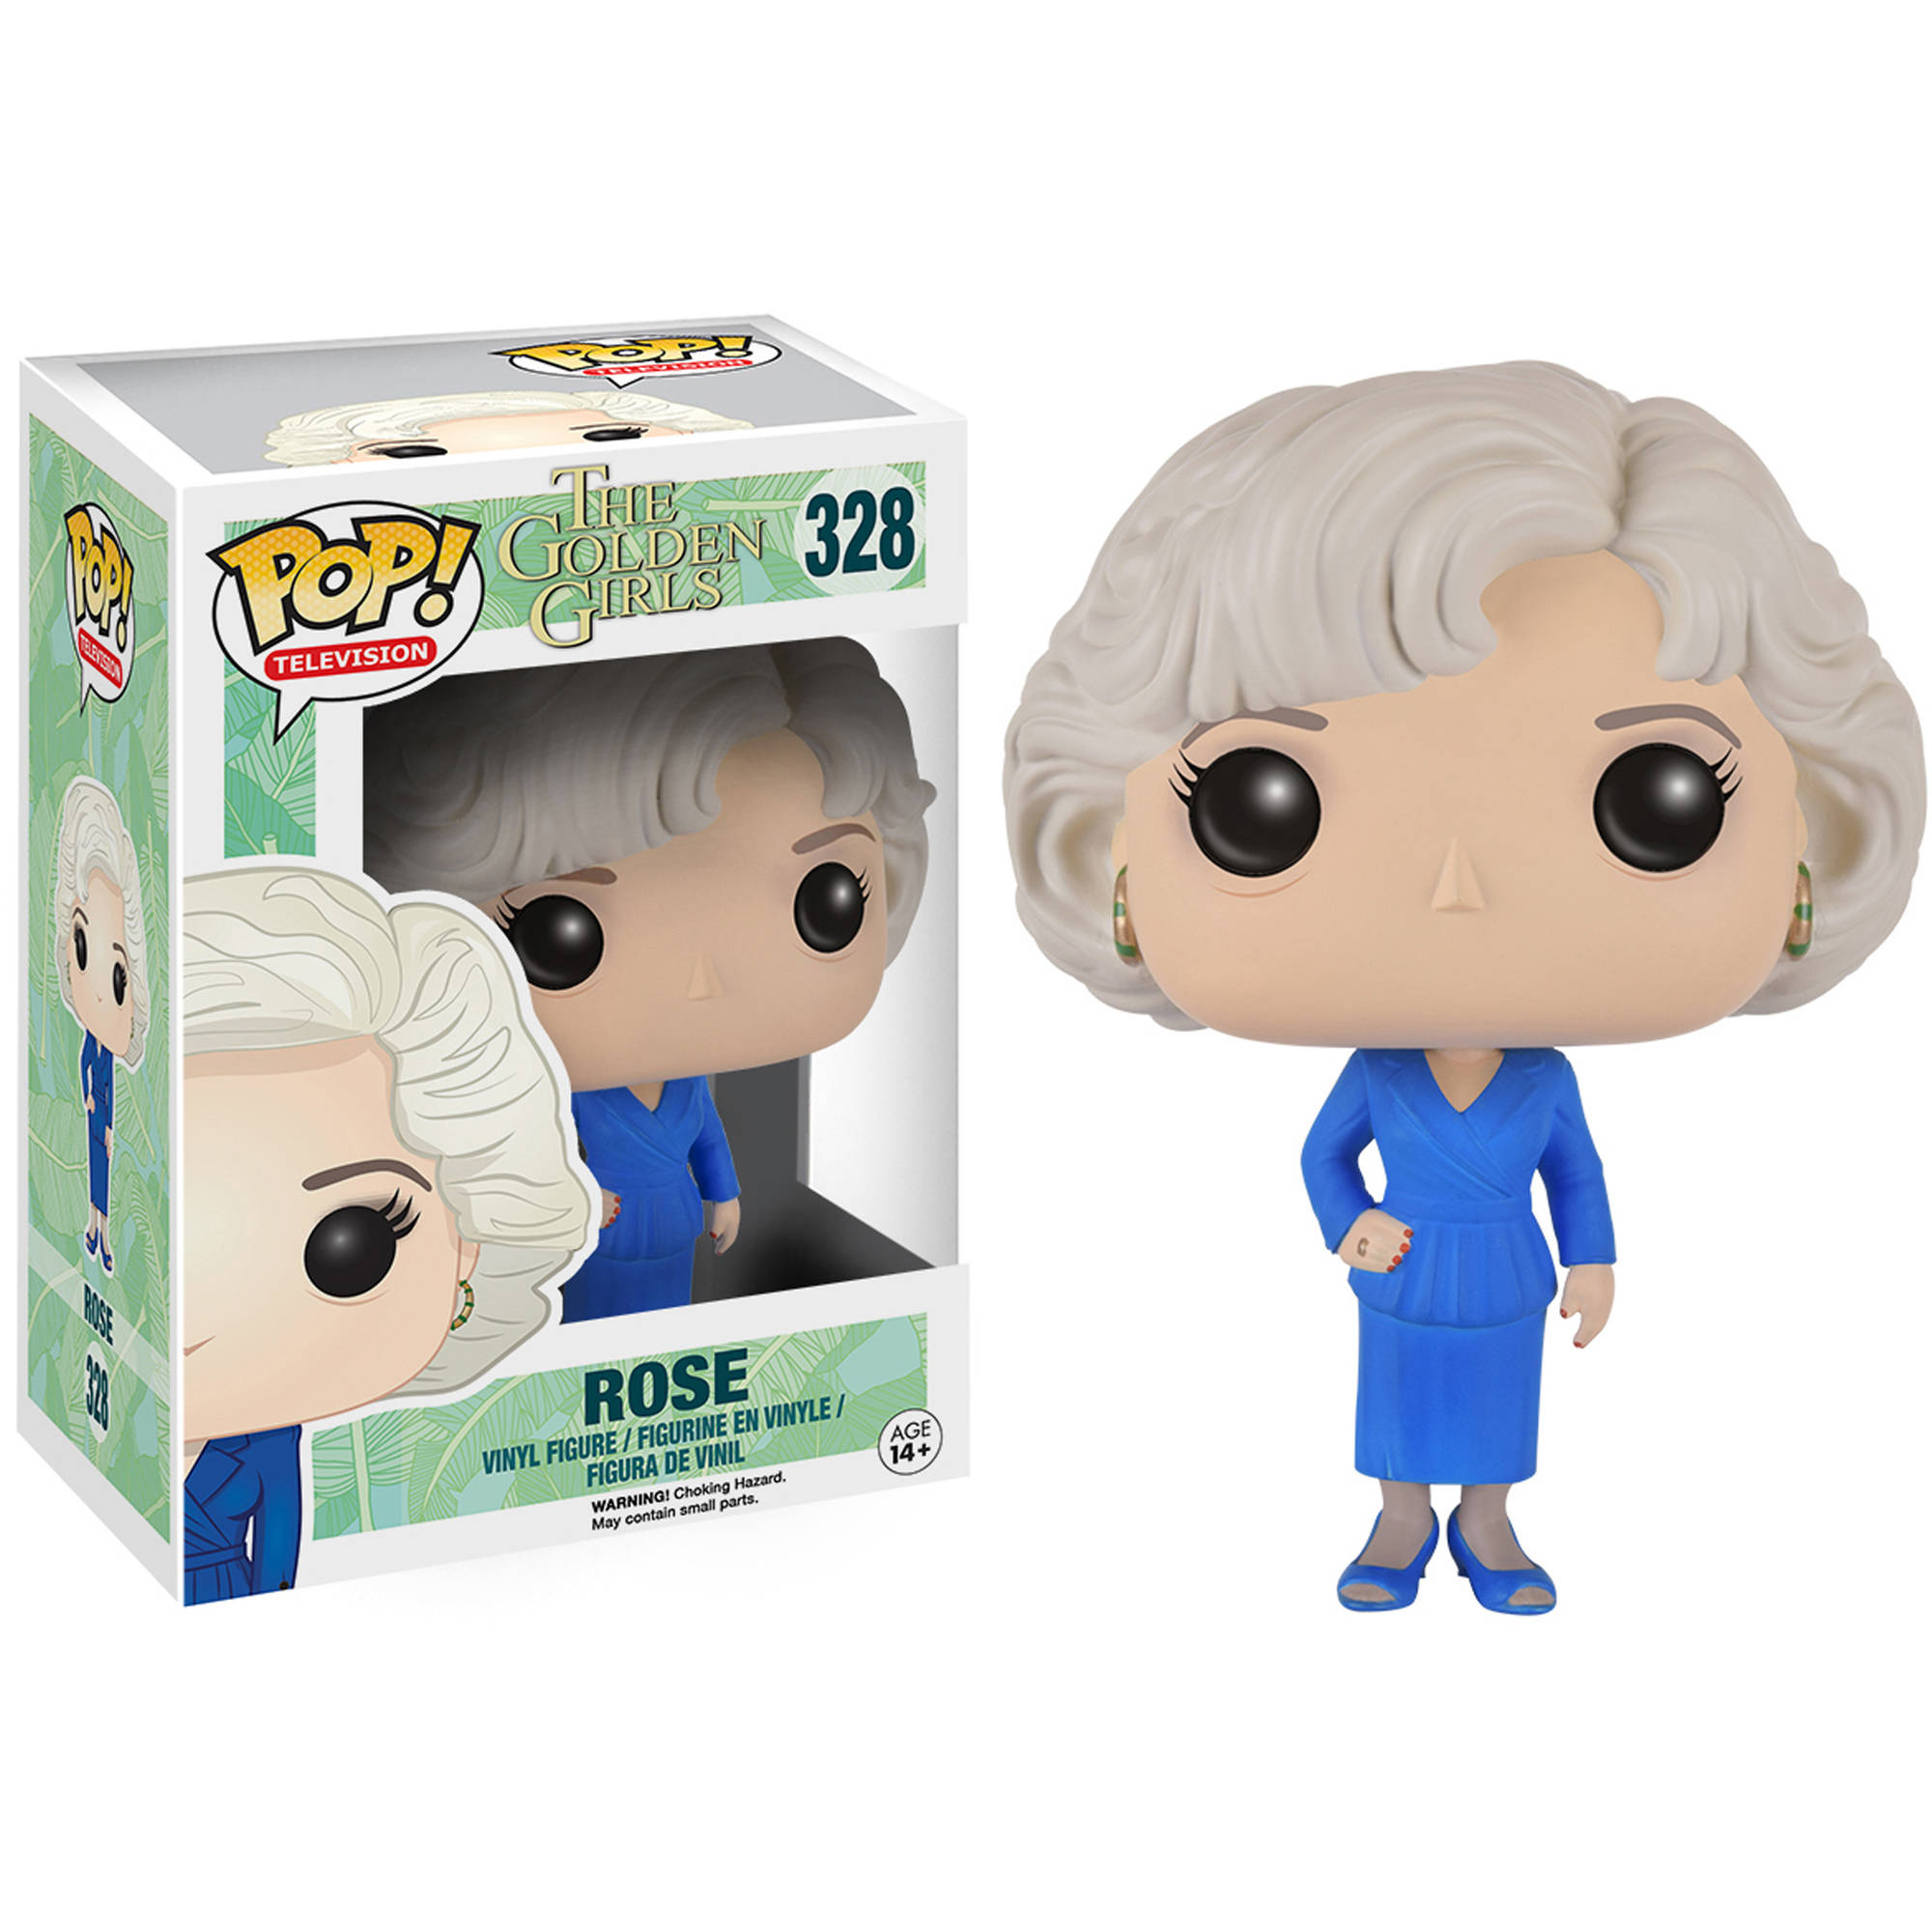 Funko POP! Golden Girls TV Collectors Set Featuring Sophia, Rose, Blanche and Dorothy - image 3 of 5